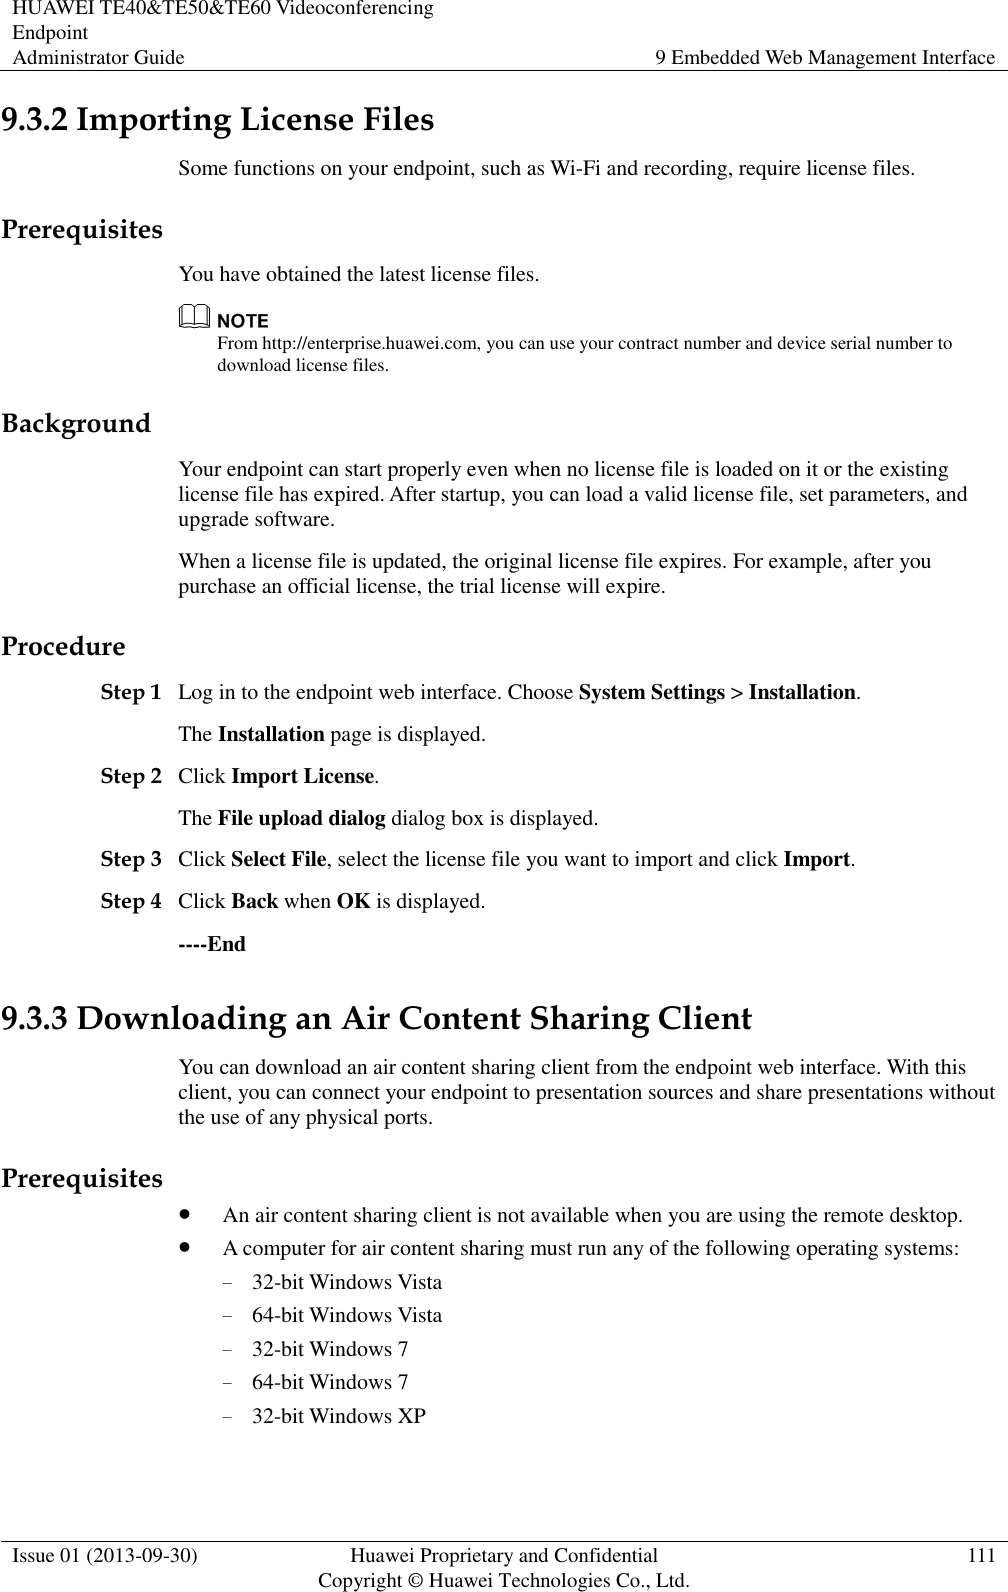 HUAWEI TE40&amp;TE50&amp;TE60 Videoconferencing Endpoint Administrator Guide 9 Embedded Web Management Interface  Issue 01 (2013-09-30) Huawei Proprietary and Confidential                                     Copyright © Huawei Technologies Co., Ltd. 111  9.3.2 Importing License Files Some functions on your endpoint, such as Wi-Fi and recording, require license files. Prerequisites You have obtained the latest license files.    From http://enterprise.huawei.com, you can use your contract number and device serial number to download license files. Background Your endpoint can start properly even when no license file is loaded on it or the existing license file has expired. After startup, you can load a valid license file, set parameters, and upgrade software.   When a license file is updated, the original license file expires. For example, after you purchase an official license, the trial license will expire. Procedure Step 1 Log in to the endpoint web interface. Choose System Settings &gt; Installation. The Installation page is displayed. Step 2 Click Import License. The File upload dialog dialog box is displayed. Step 3 Click Select File, select the license file you want to import and click Import. Step 4 Click Back when OK is displayed. ----End 9.3.3 Downloading an Air Content Sharing Client You can download an air content sharing client from the endpoint web interface. With this client, you can connect your endpoint to presentation sources and share presentations without the use of any physical ports. Prerequisites  An air content sharing client is not available when you are using the remote desktop.    A computer for air content sharing must run any of the following operating systems: − 32-bit Windows Vista − 64-bit Windows Vista − 32-bit Windows 7 − 64-bit Windows 7 − 32-bit Windows XP 